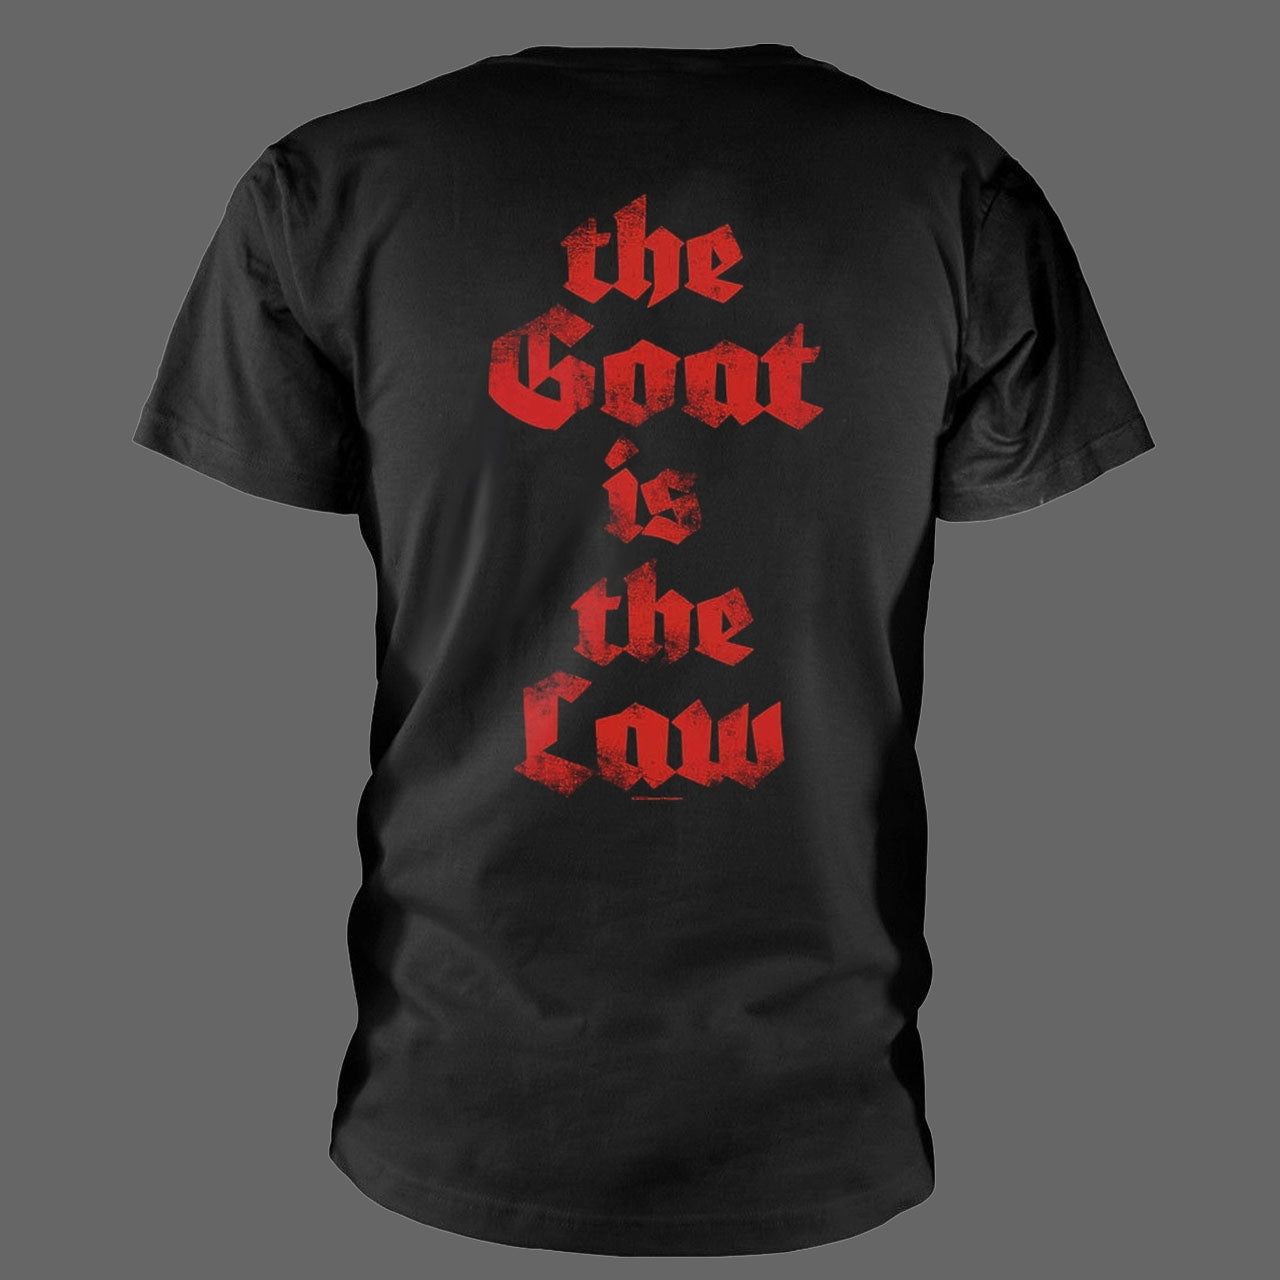 Impaled Nazarene - The Goat is the Law (T-Shirt)